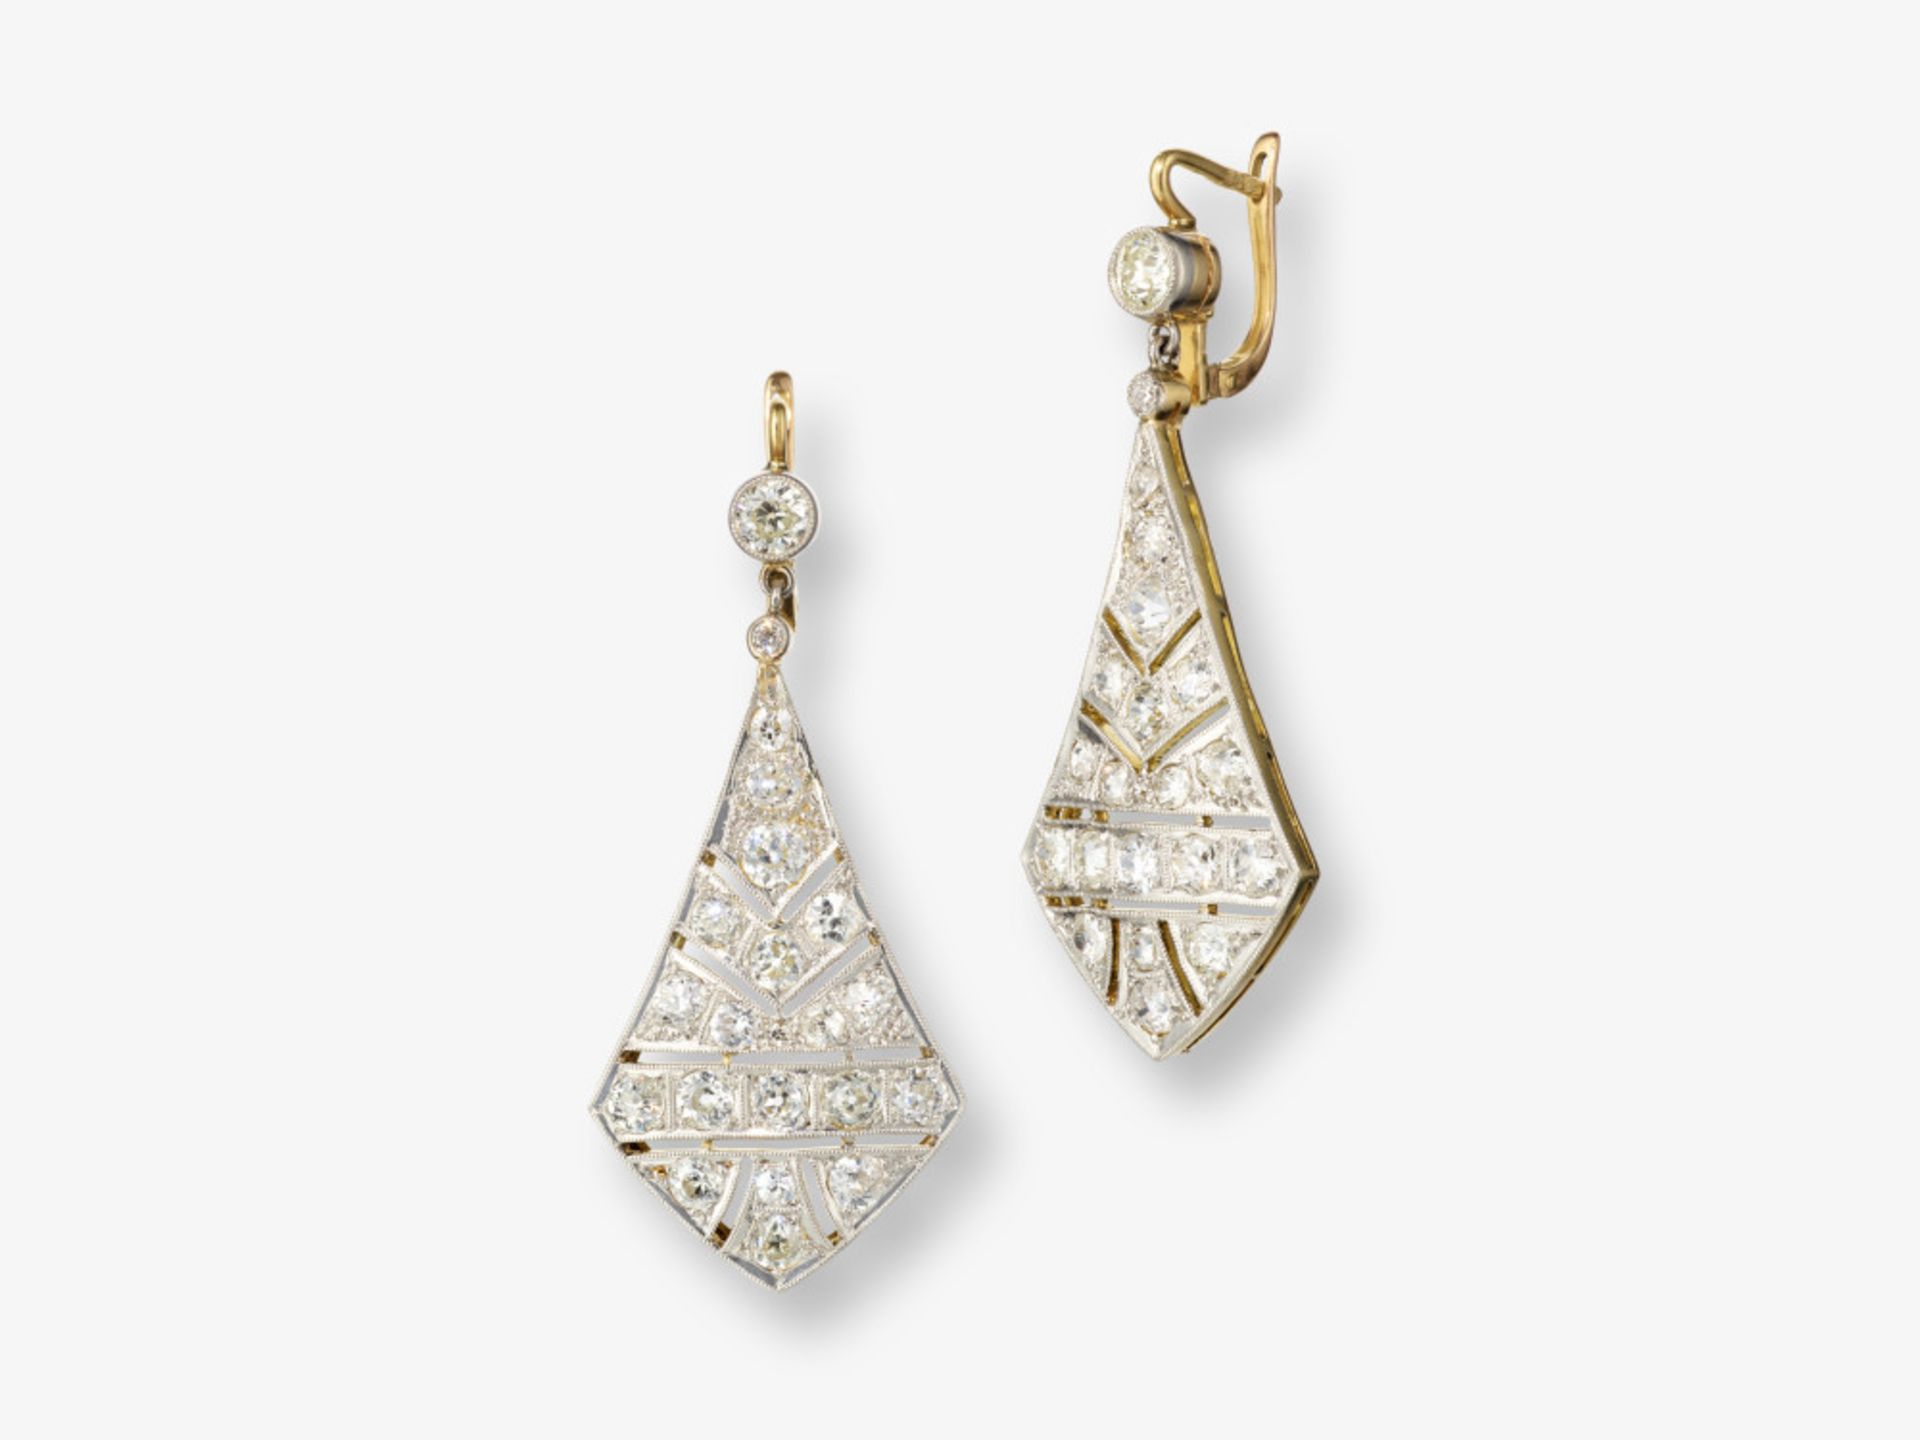 Historical drop earrings decorated with old-cut diamonds - Paris, Art Deco, 1920s